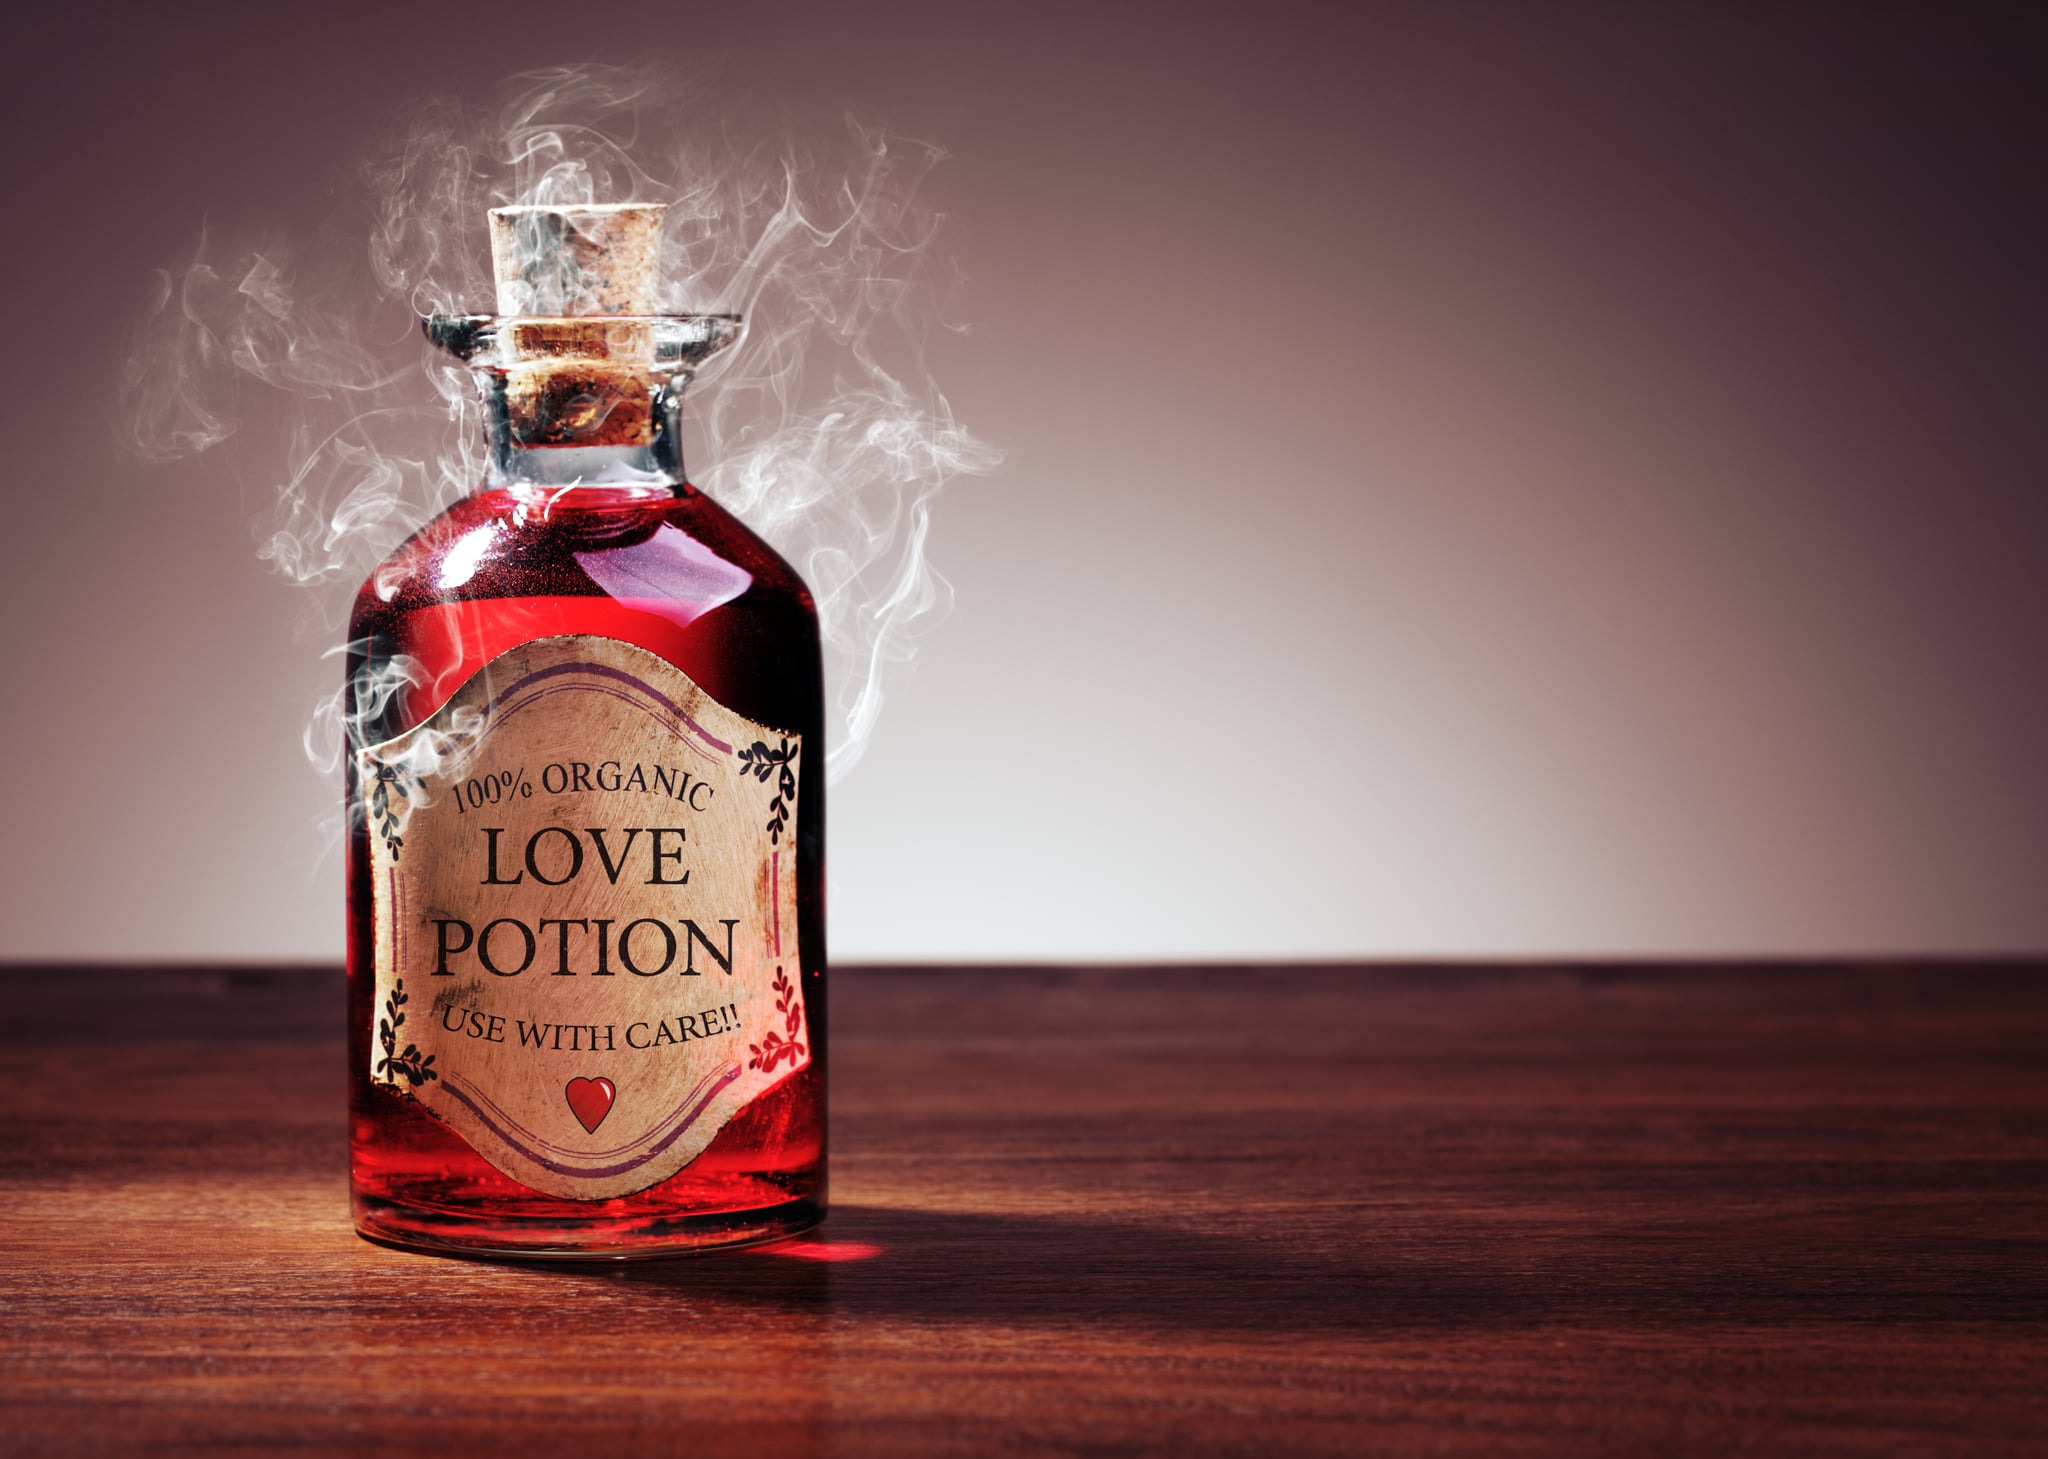 Love potion bottle, concept for dating, romance and valentine's day